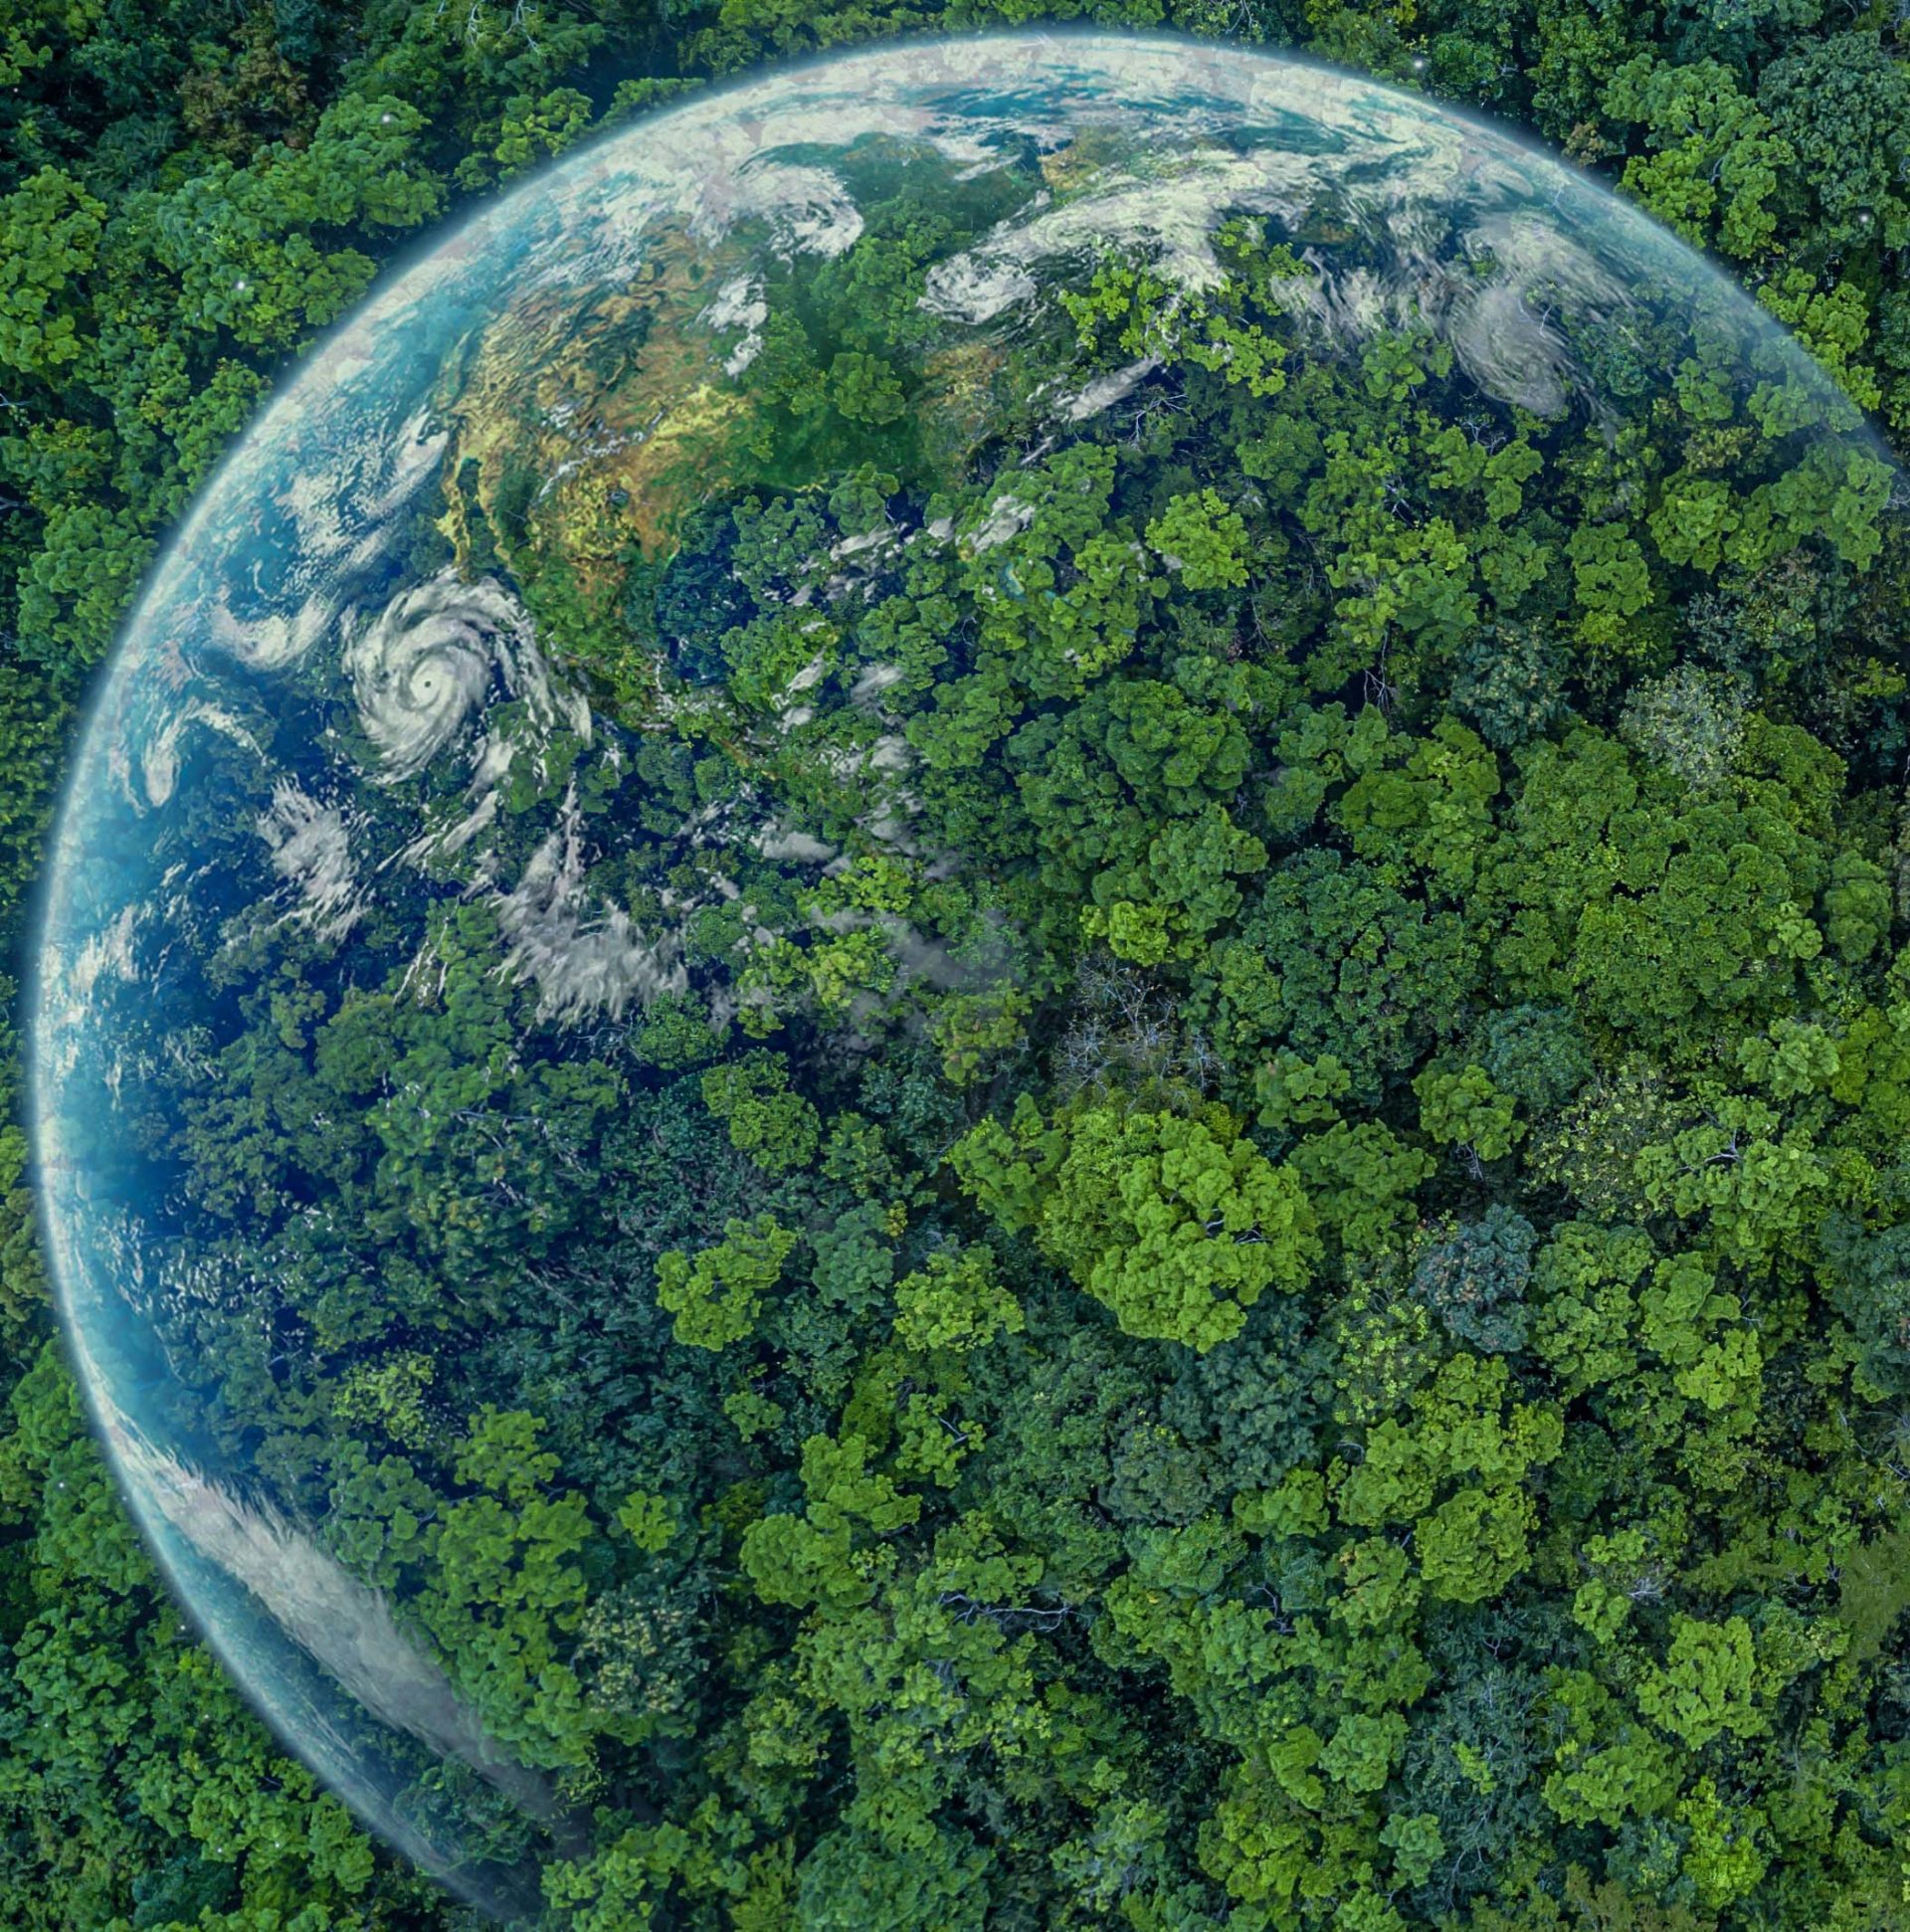 Image of earth filled with trees.